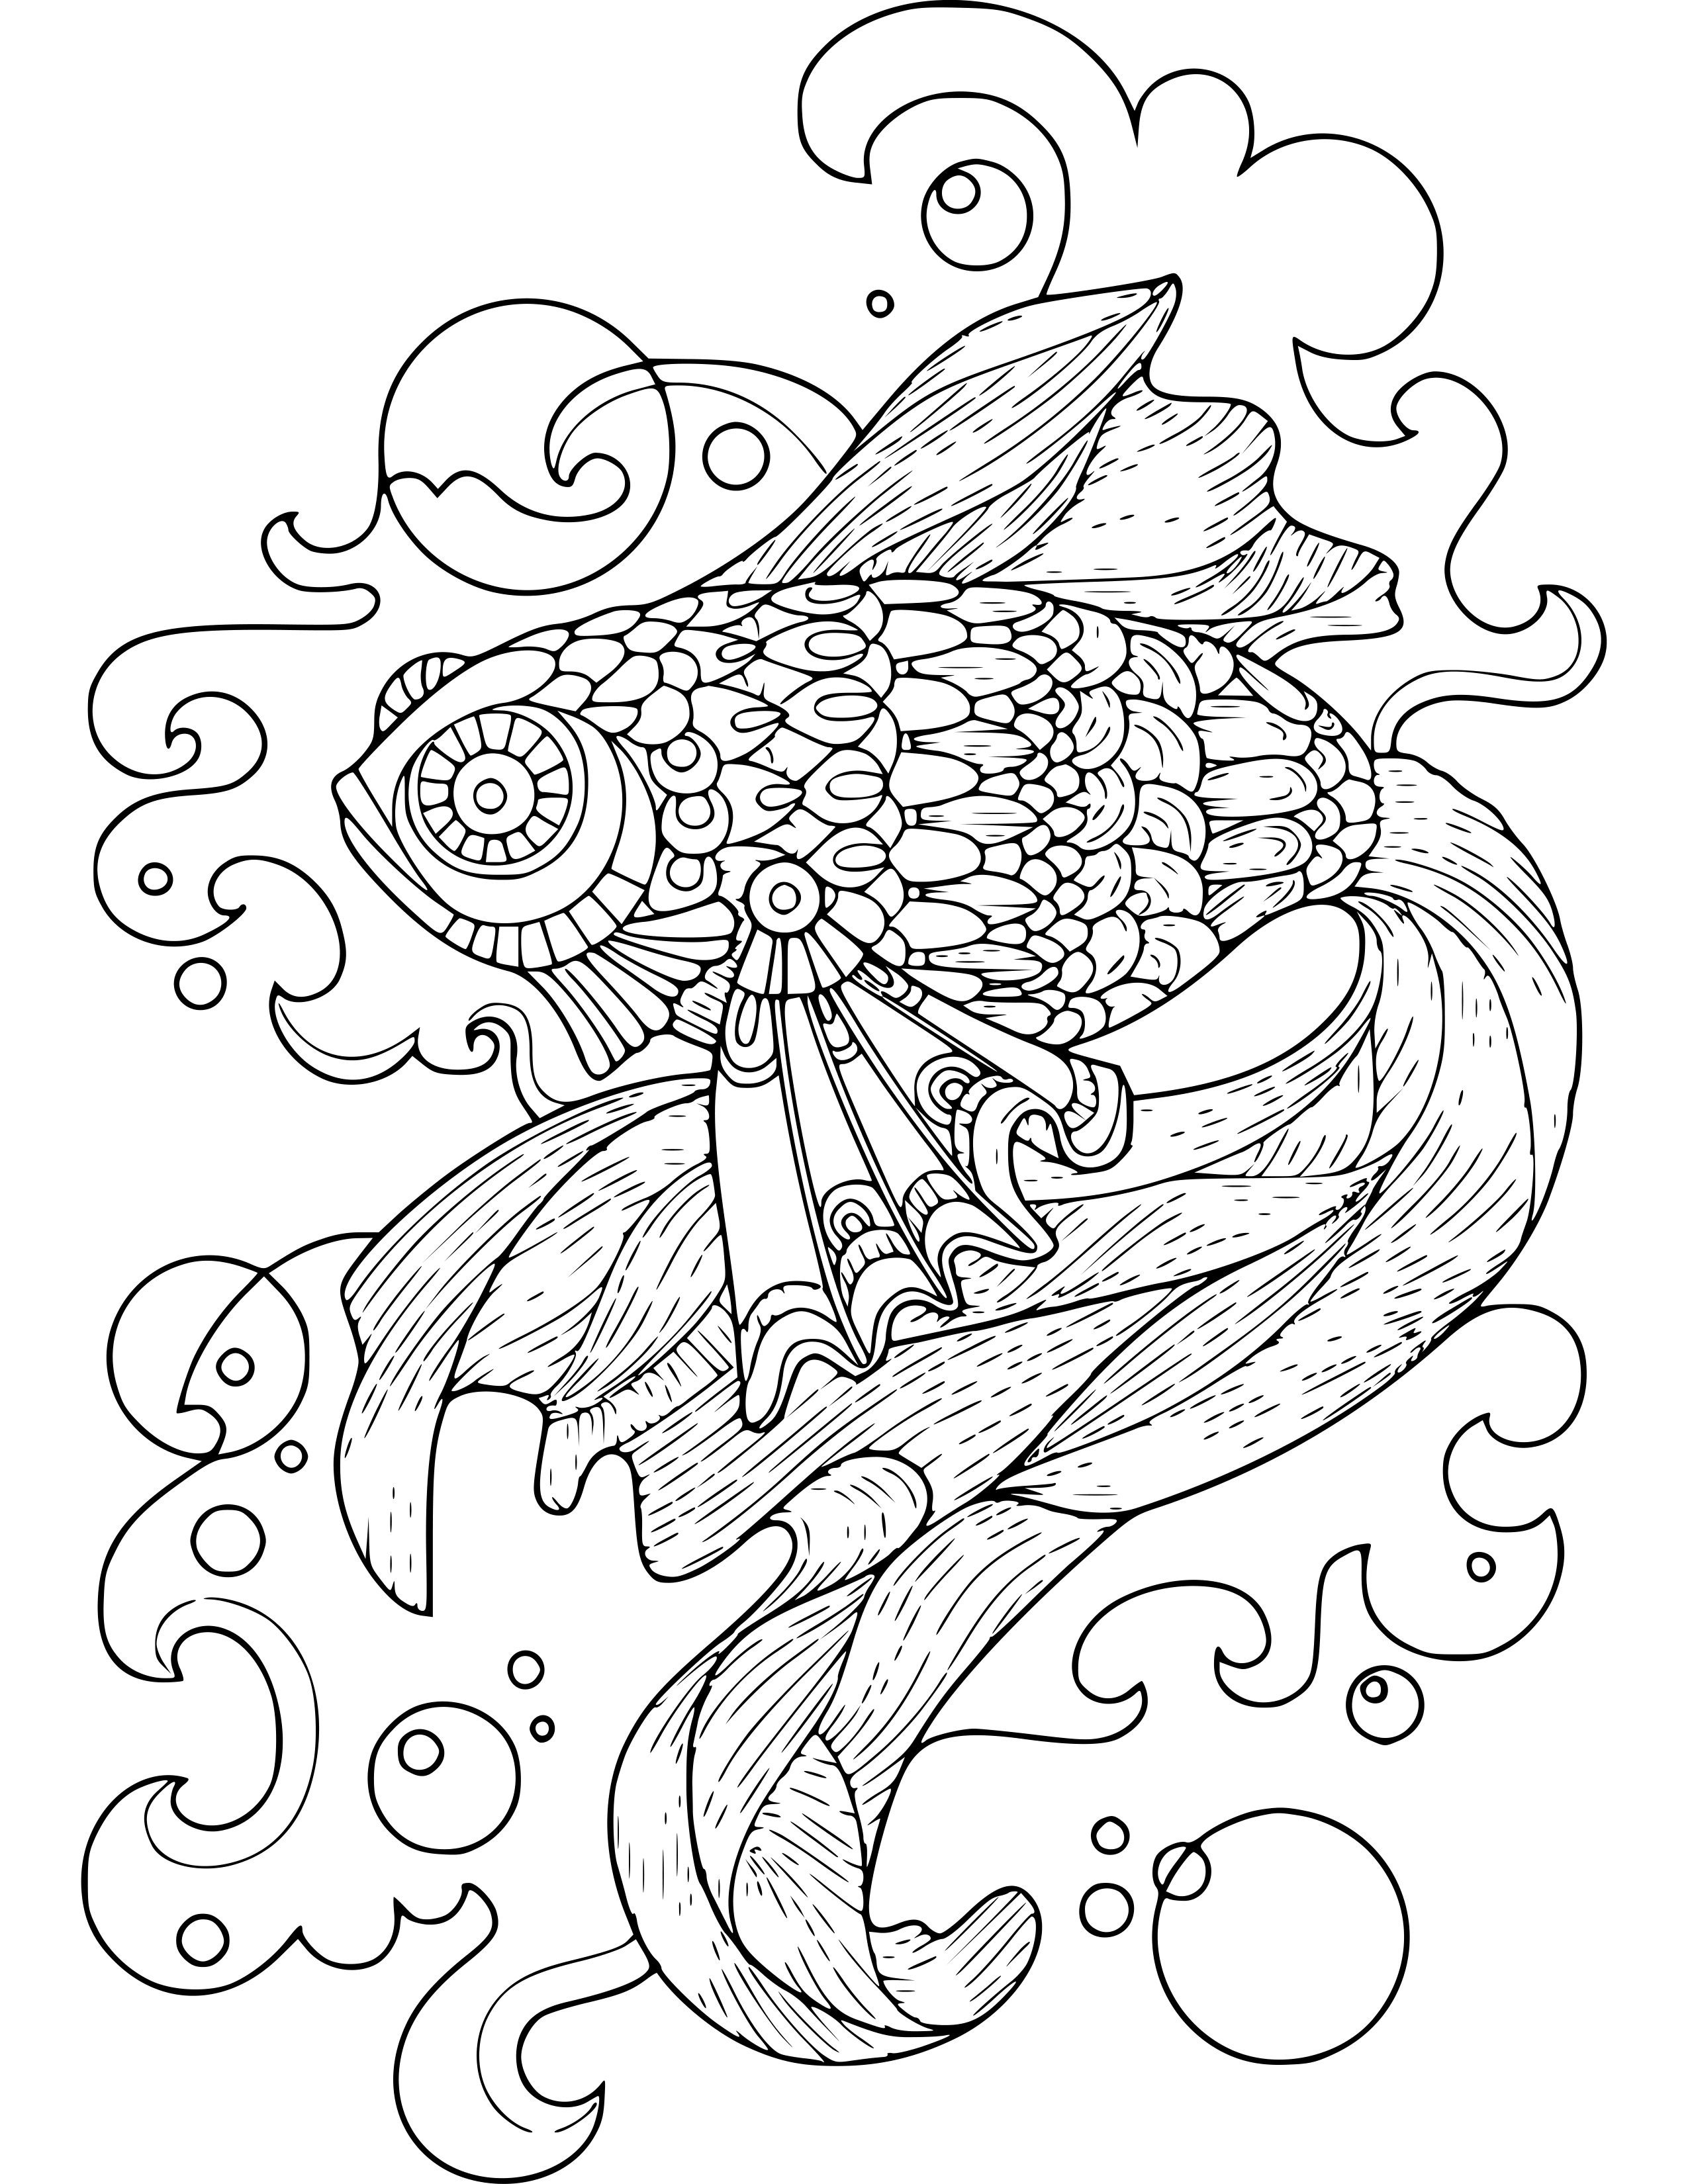 60 Animal Coloring Pages For Adults With Resell Right For 15 Seoclerks